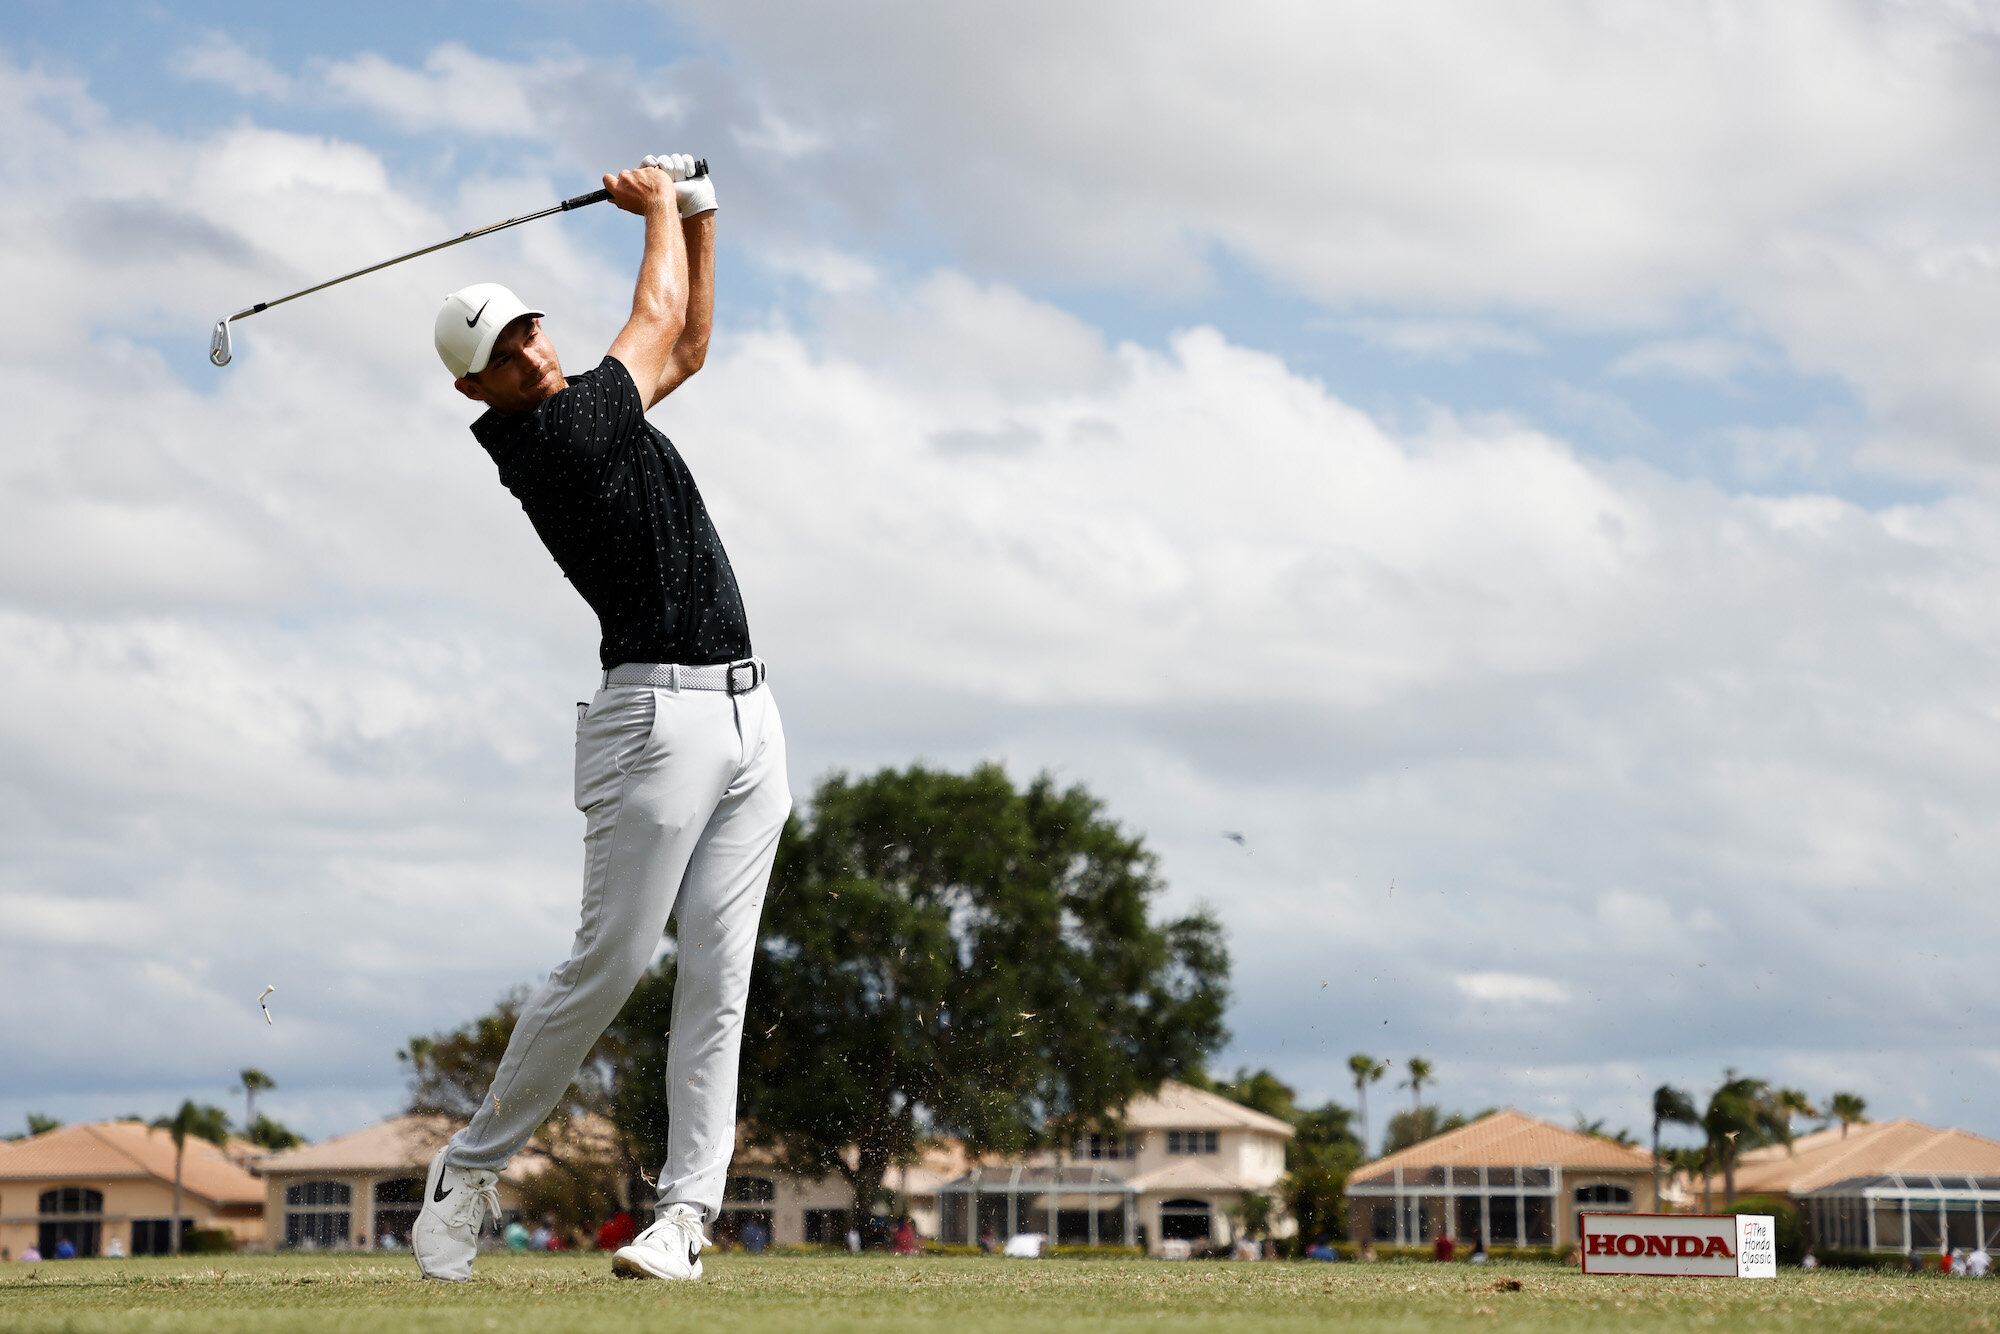  PALM BEACH GARDENS, FLORIDA - MARCH 20: Aaron Wise of the United States plays his shot from the fifth tee during the third round of The Honda Classic at PGA National Champion course on March 20, 2021 in Palm Beach Gardens, Florida. (Photo by Jared C